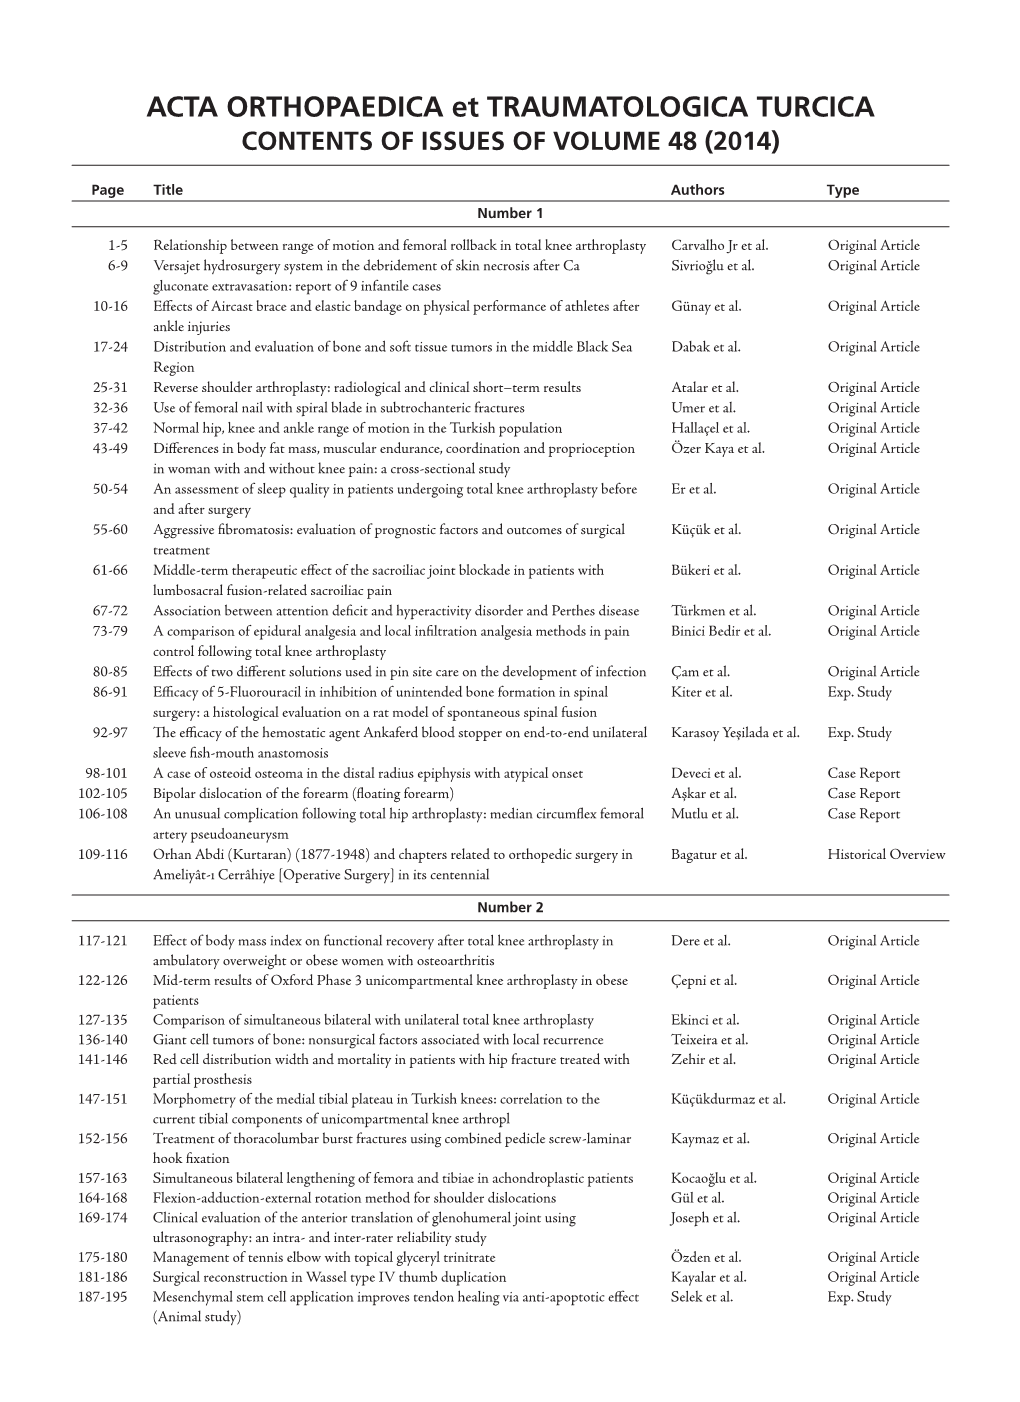 ACTA ORTHOPAEDICA Et TRAUMATOLOGICA TURCICA CONTENTS of ISSUES of VOLUME 48 (2014)